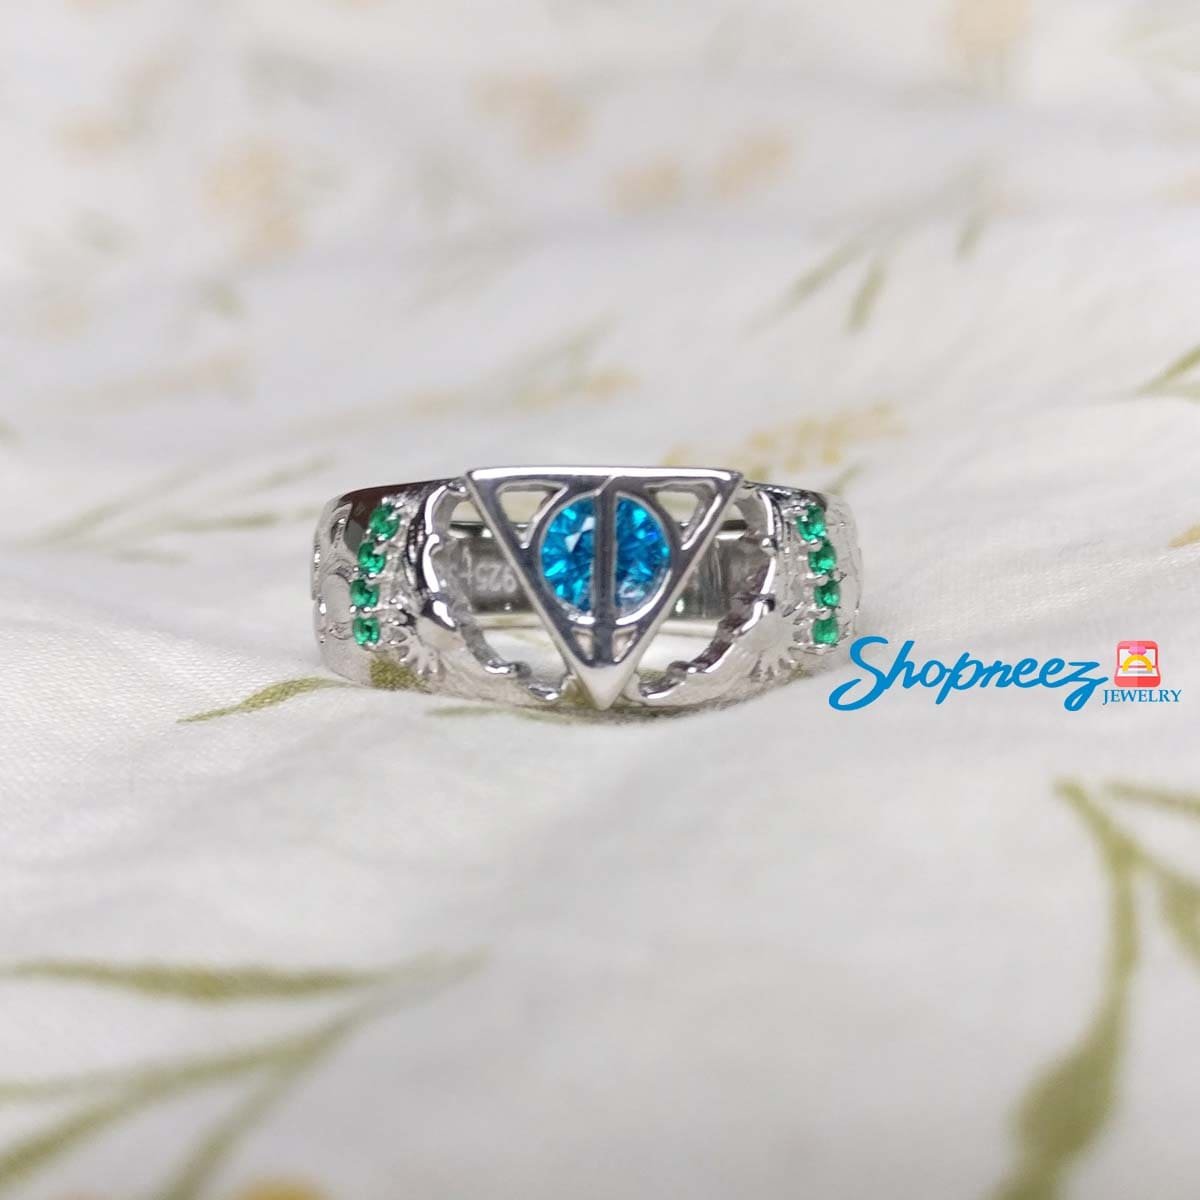 Harry potter fame Magical Owl Engagement Ring Wedding Ring